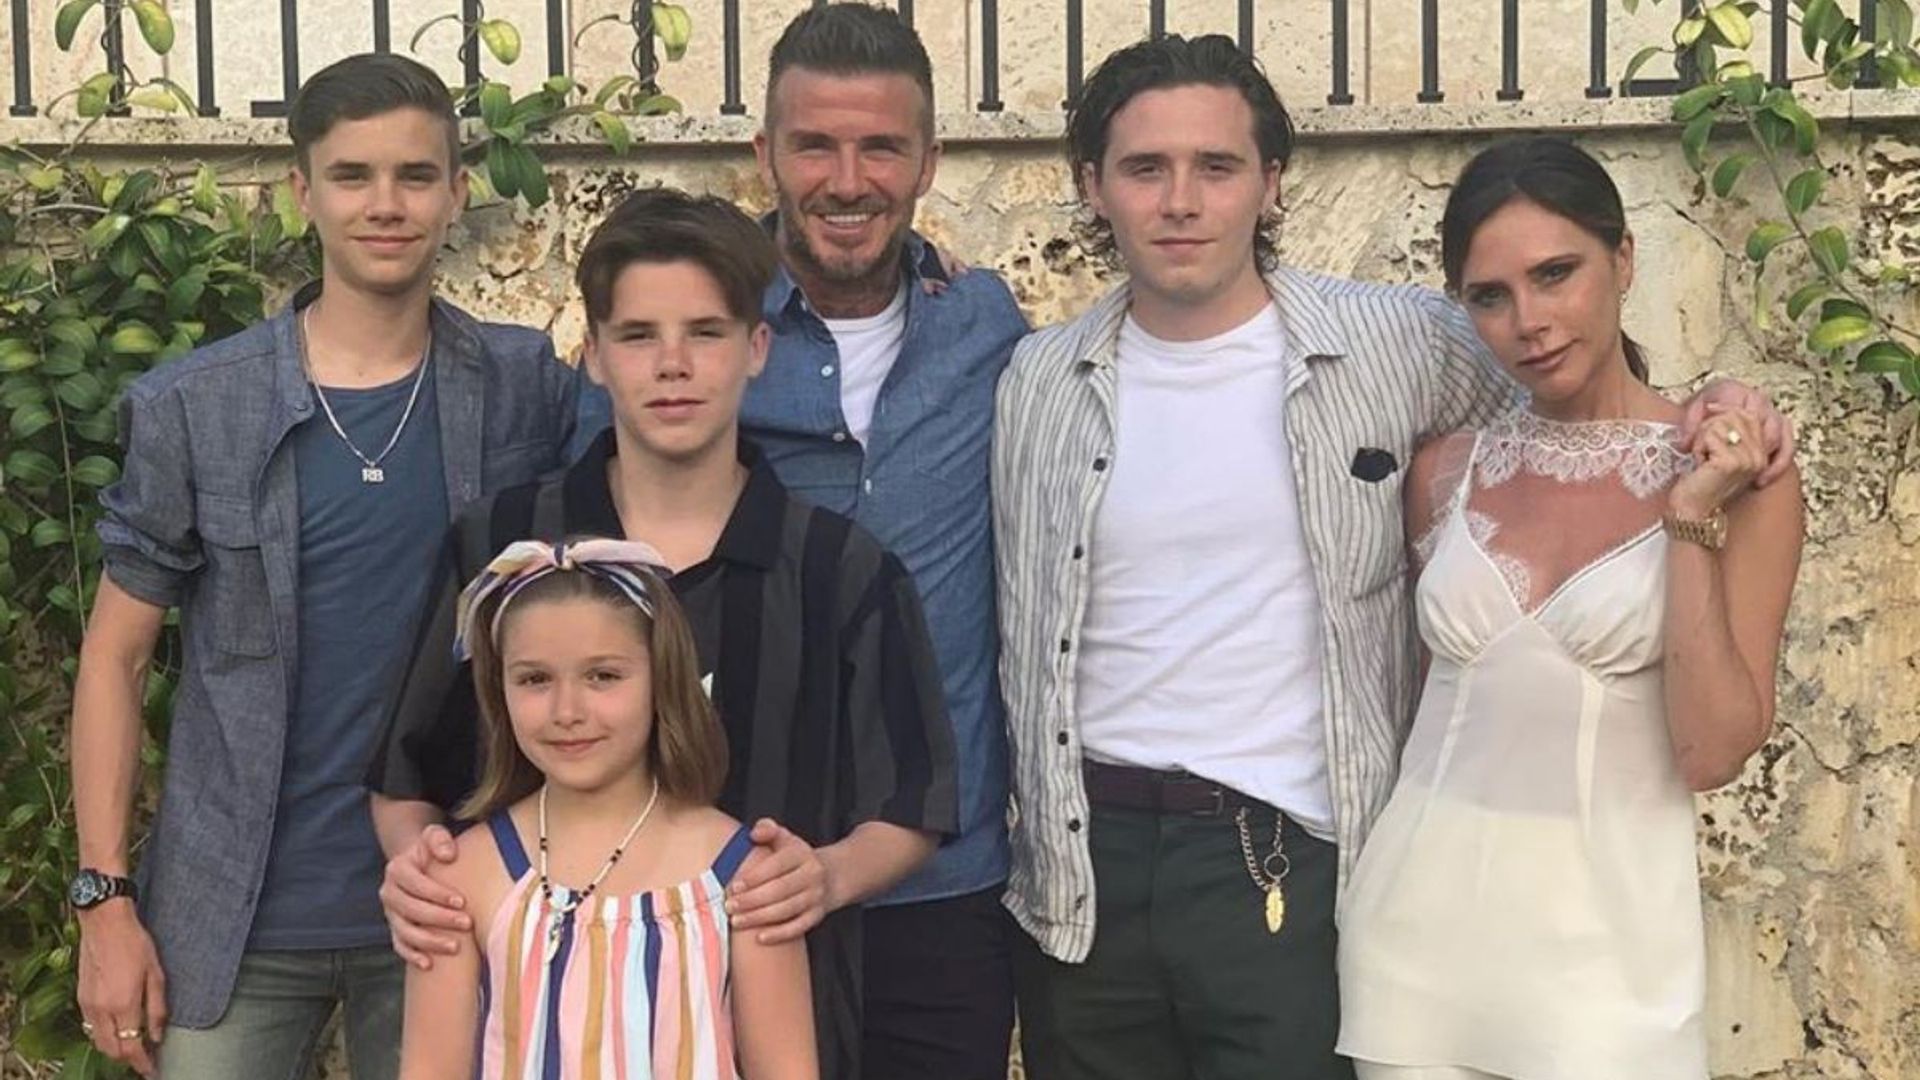 Victoria Beckham just made this sweet treat for her kids - and they loved it